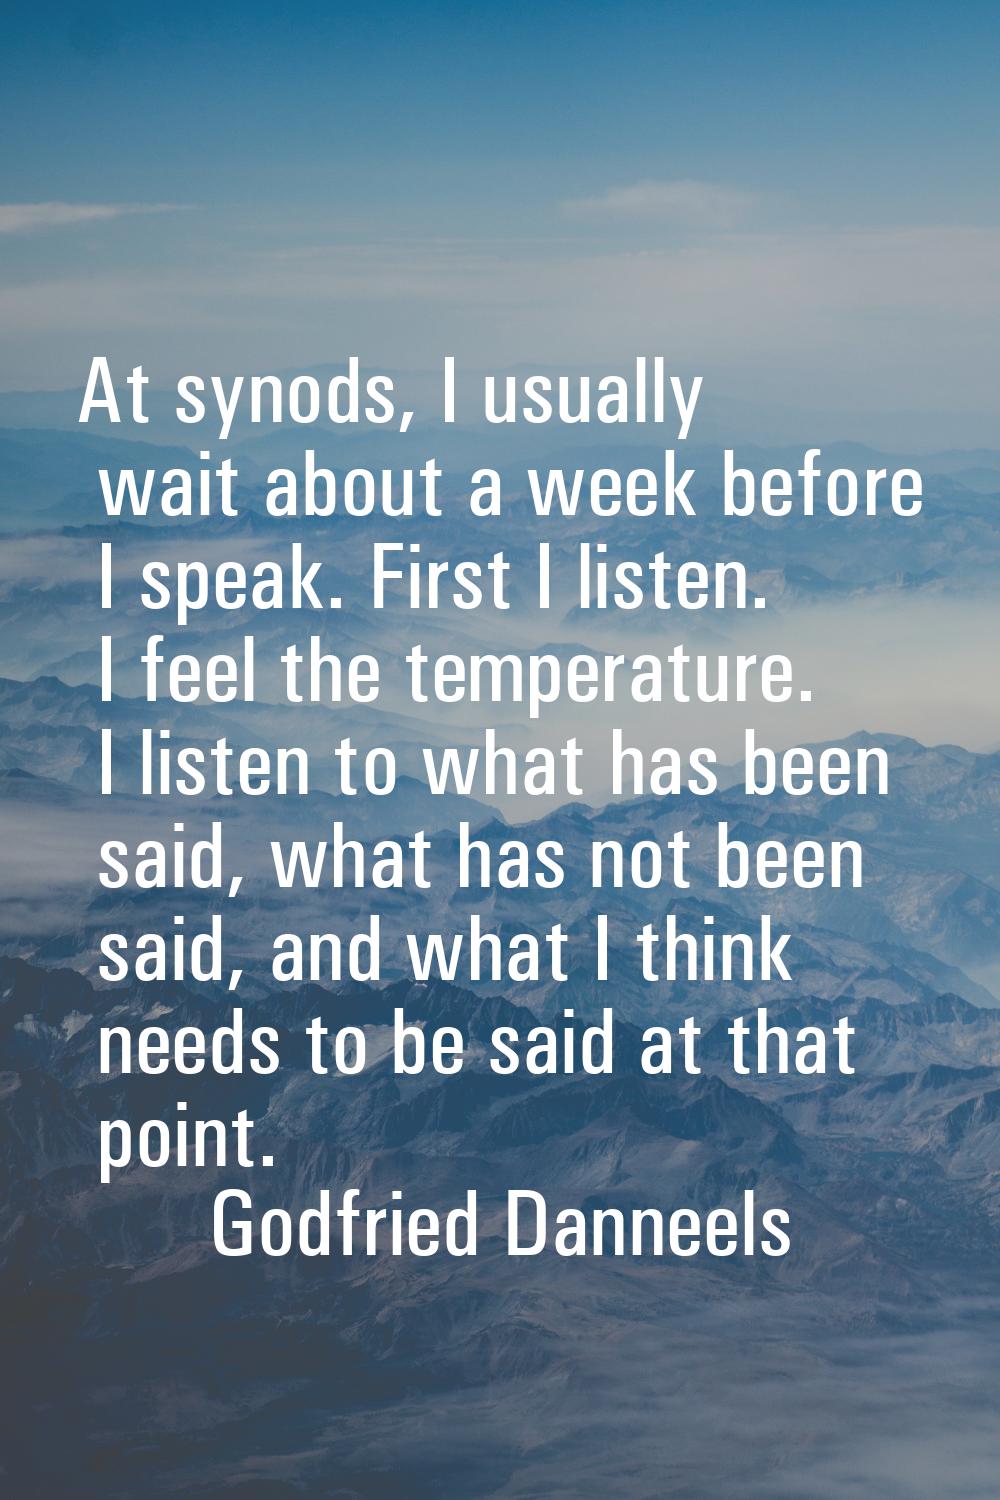 At synods, I usually wait about a week before I speak. First I listen. I feel the temperature. I li